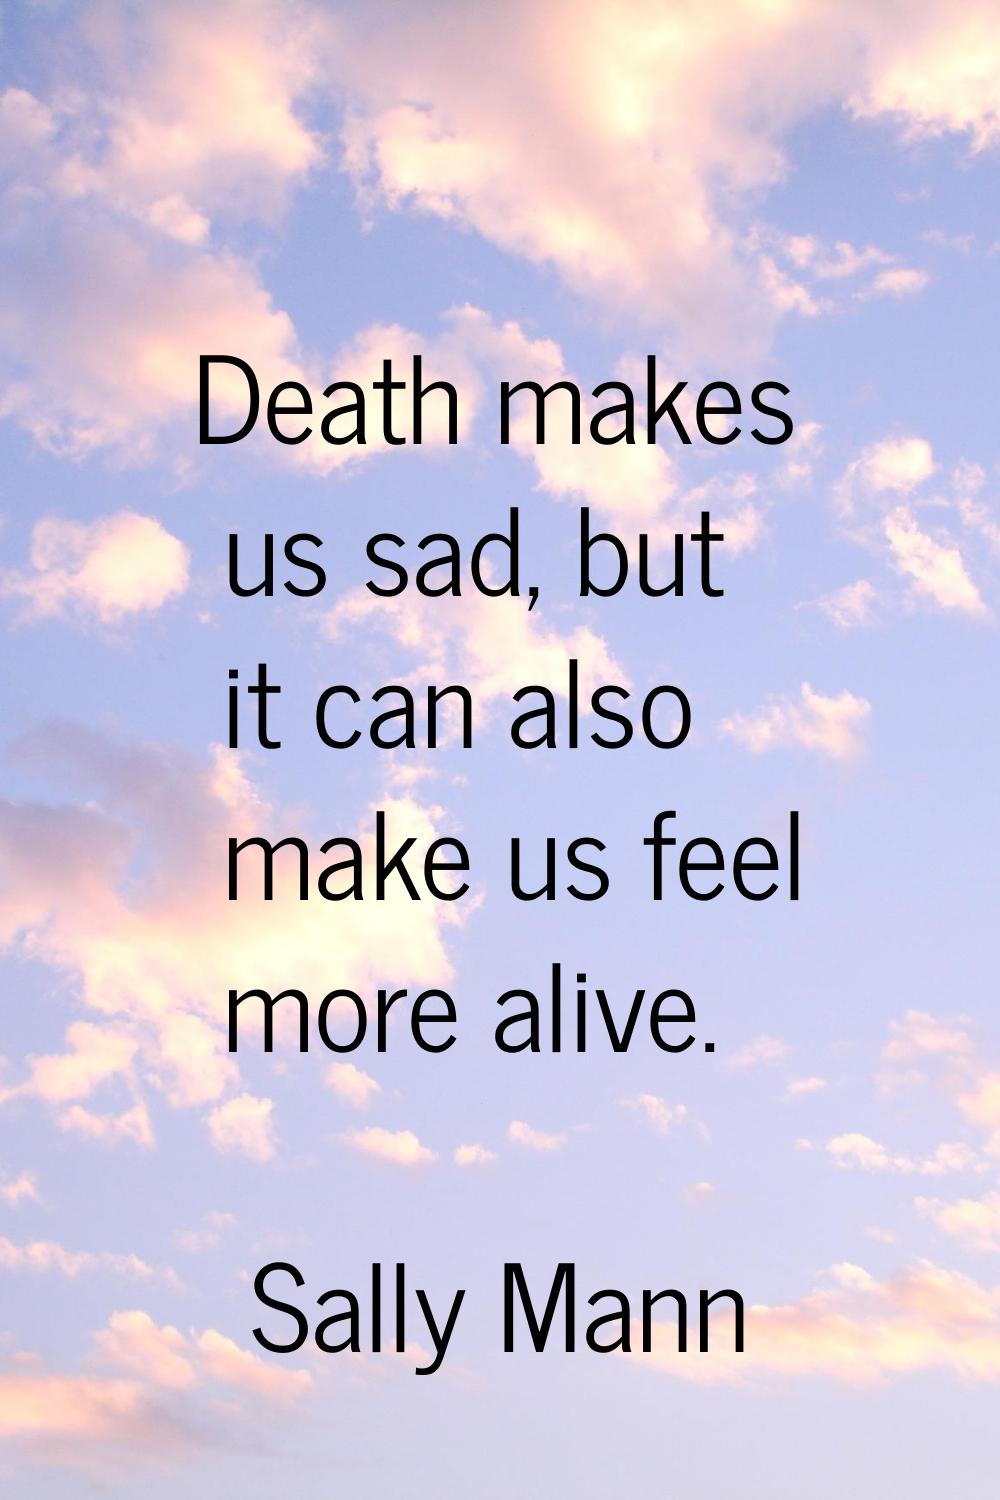 Death makes us sad, but it can also make us feel more alive.